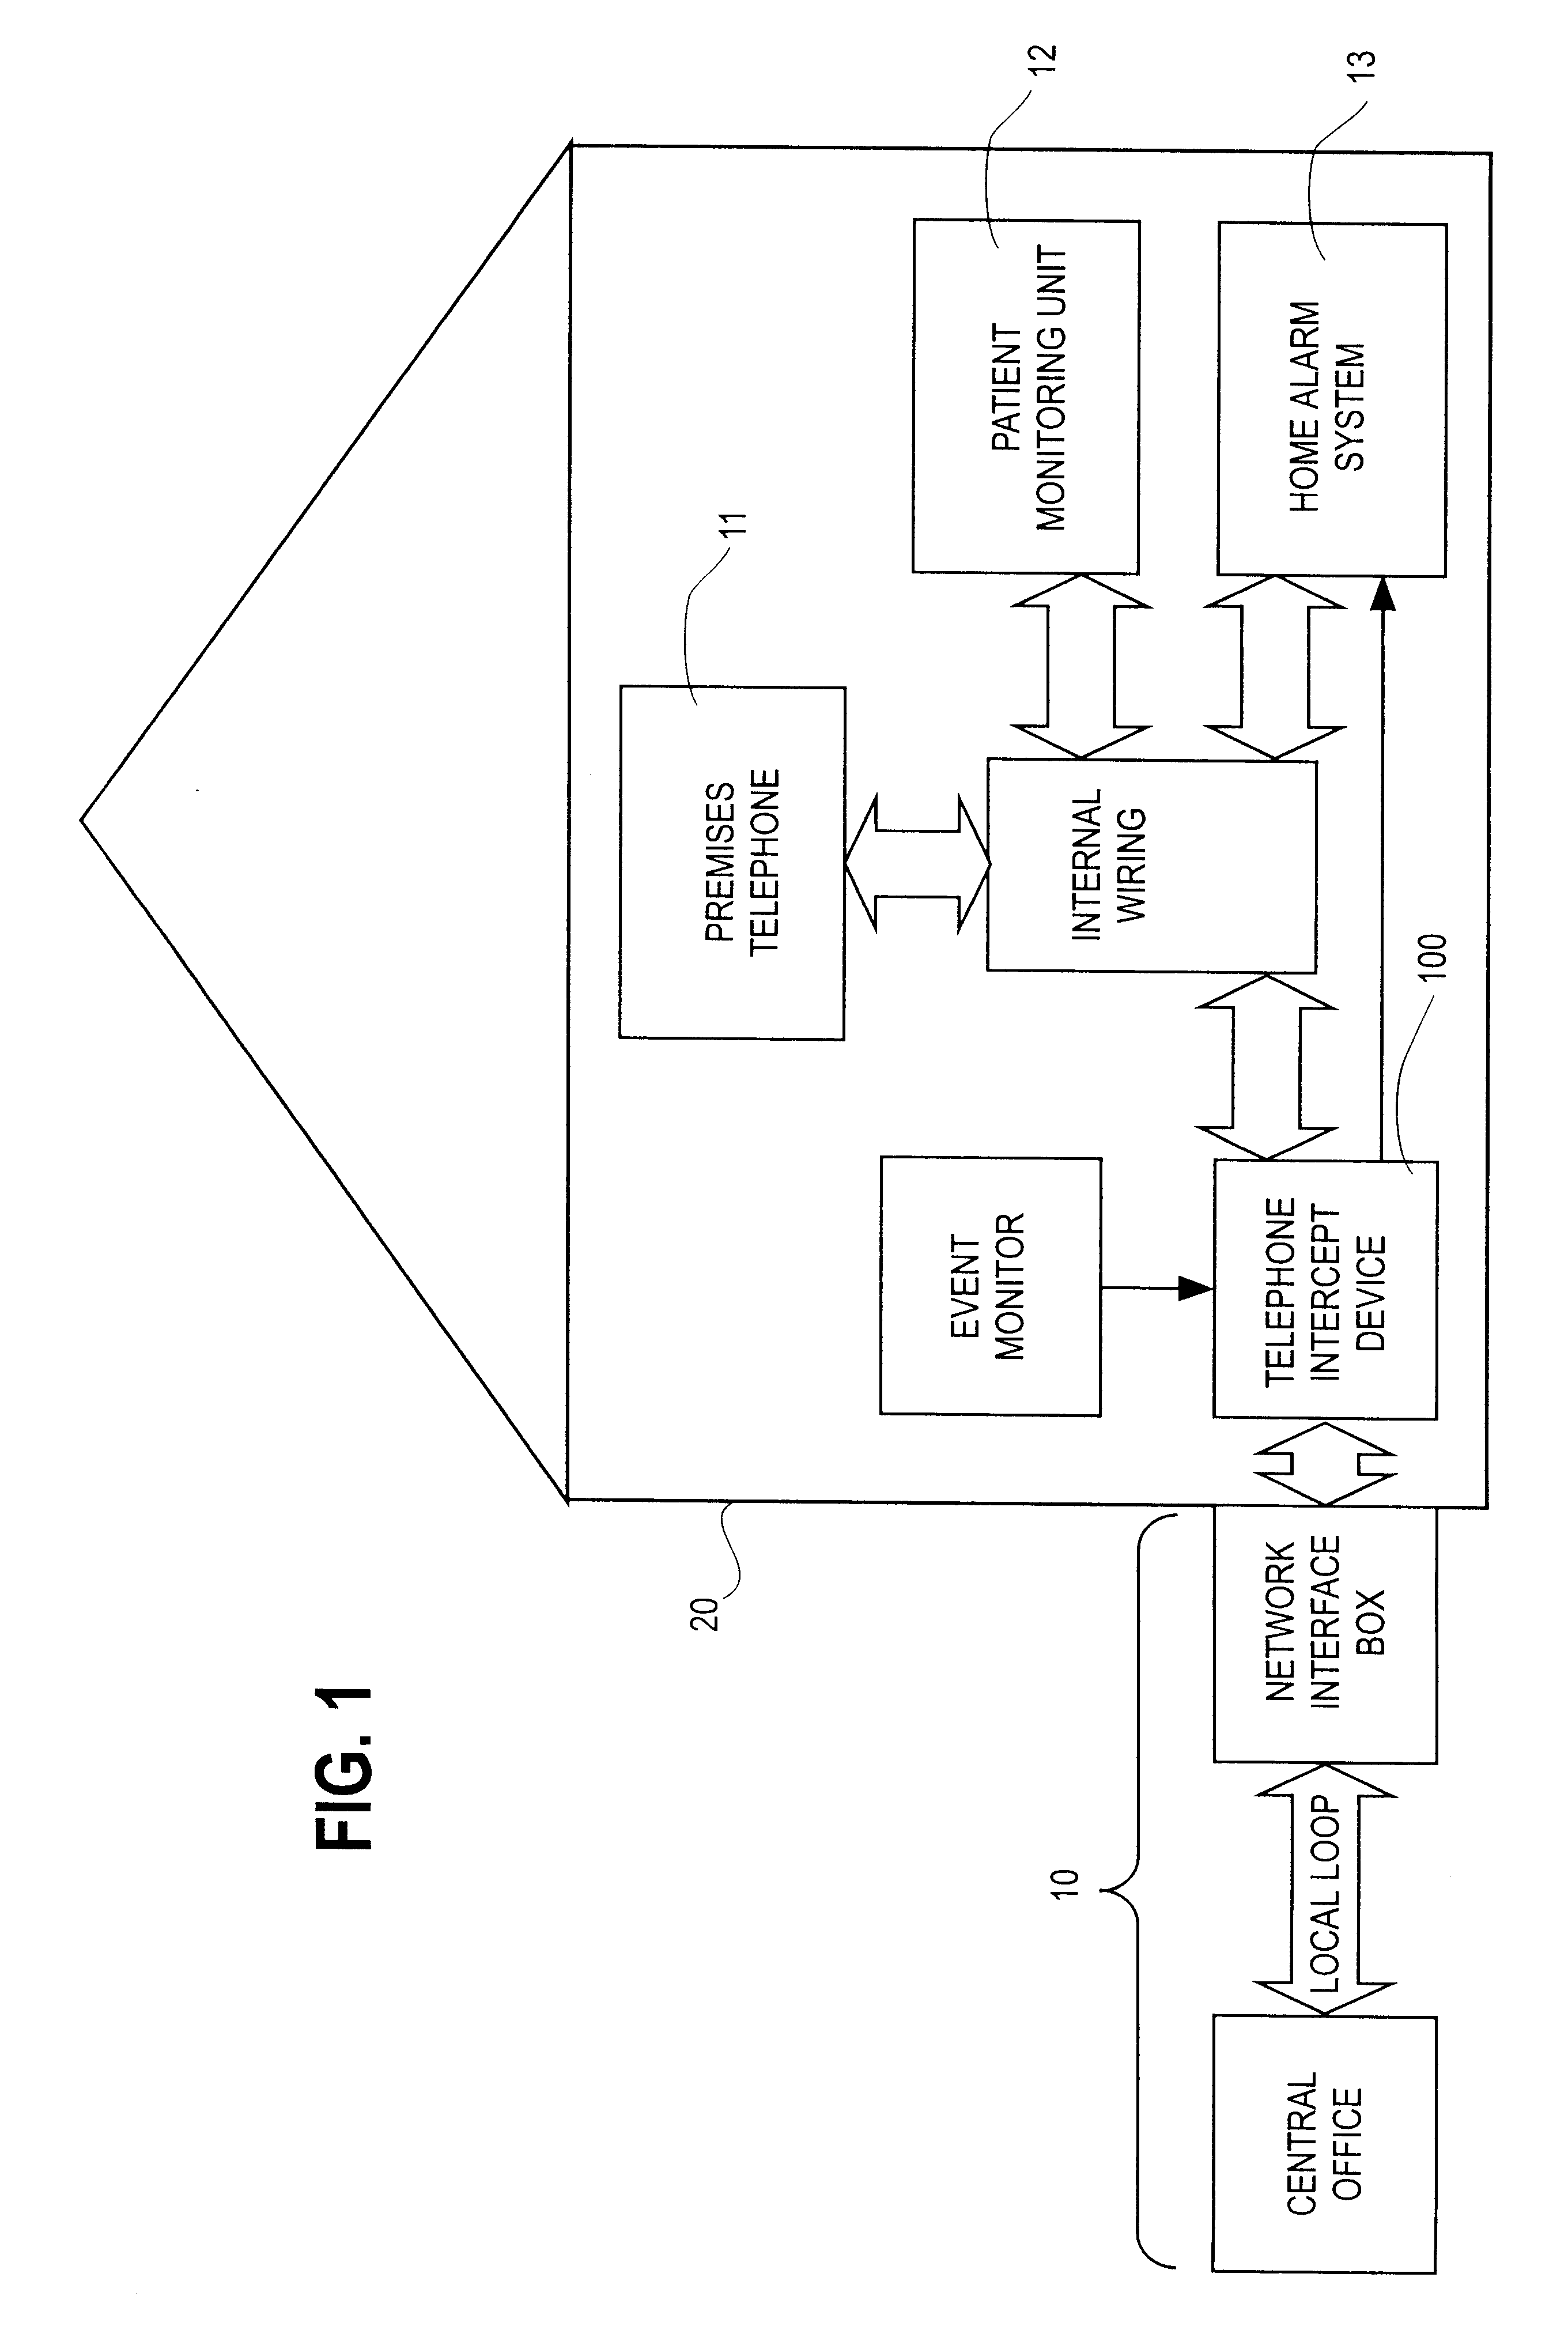 Telephone intercept apparatus and method for intercepting an outgoing telephone number